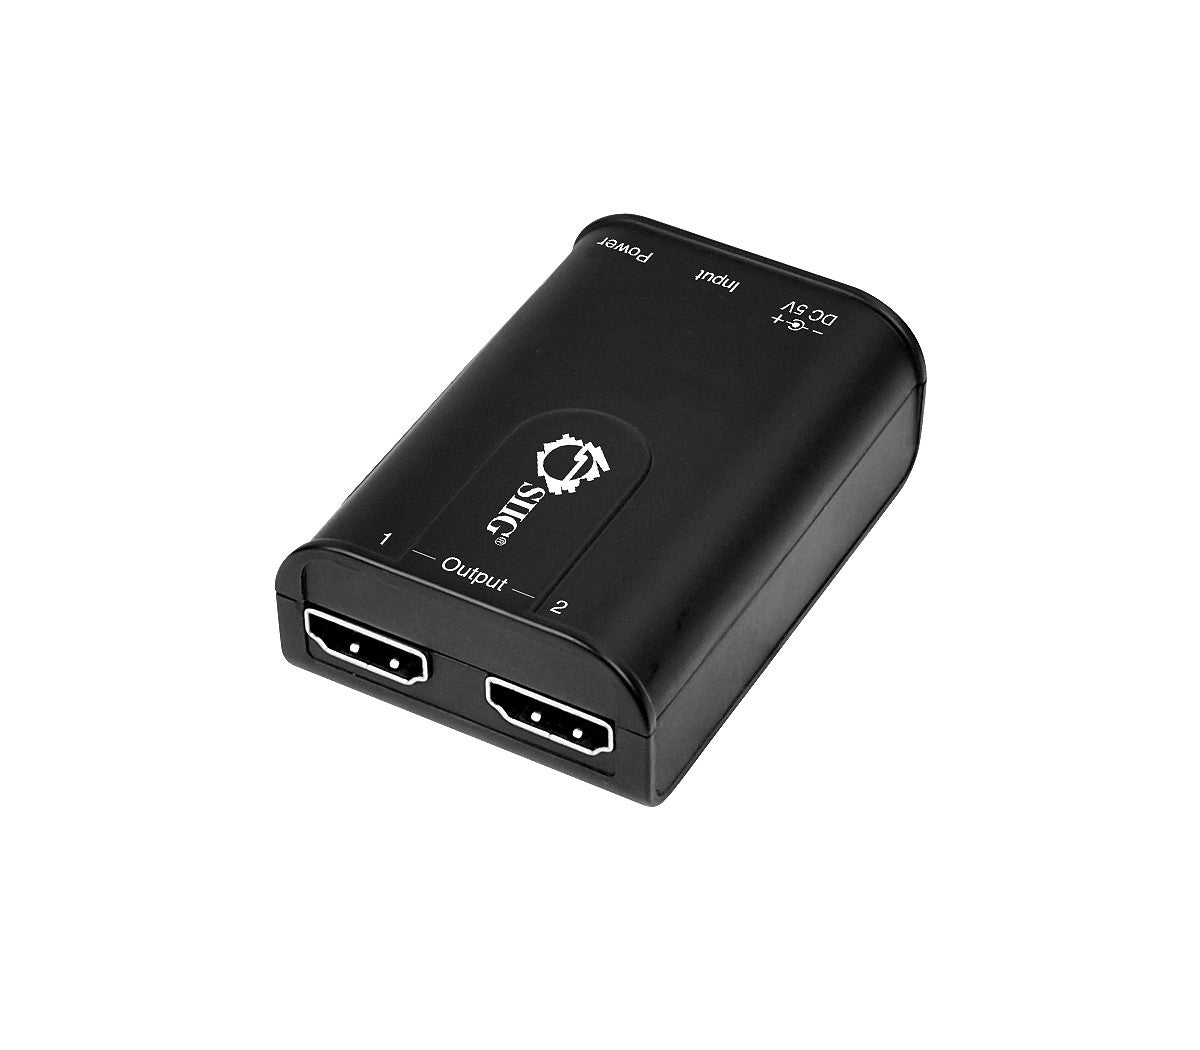 SIIG 2-Port HDMI Splitter with Audio - USB Powered